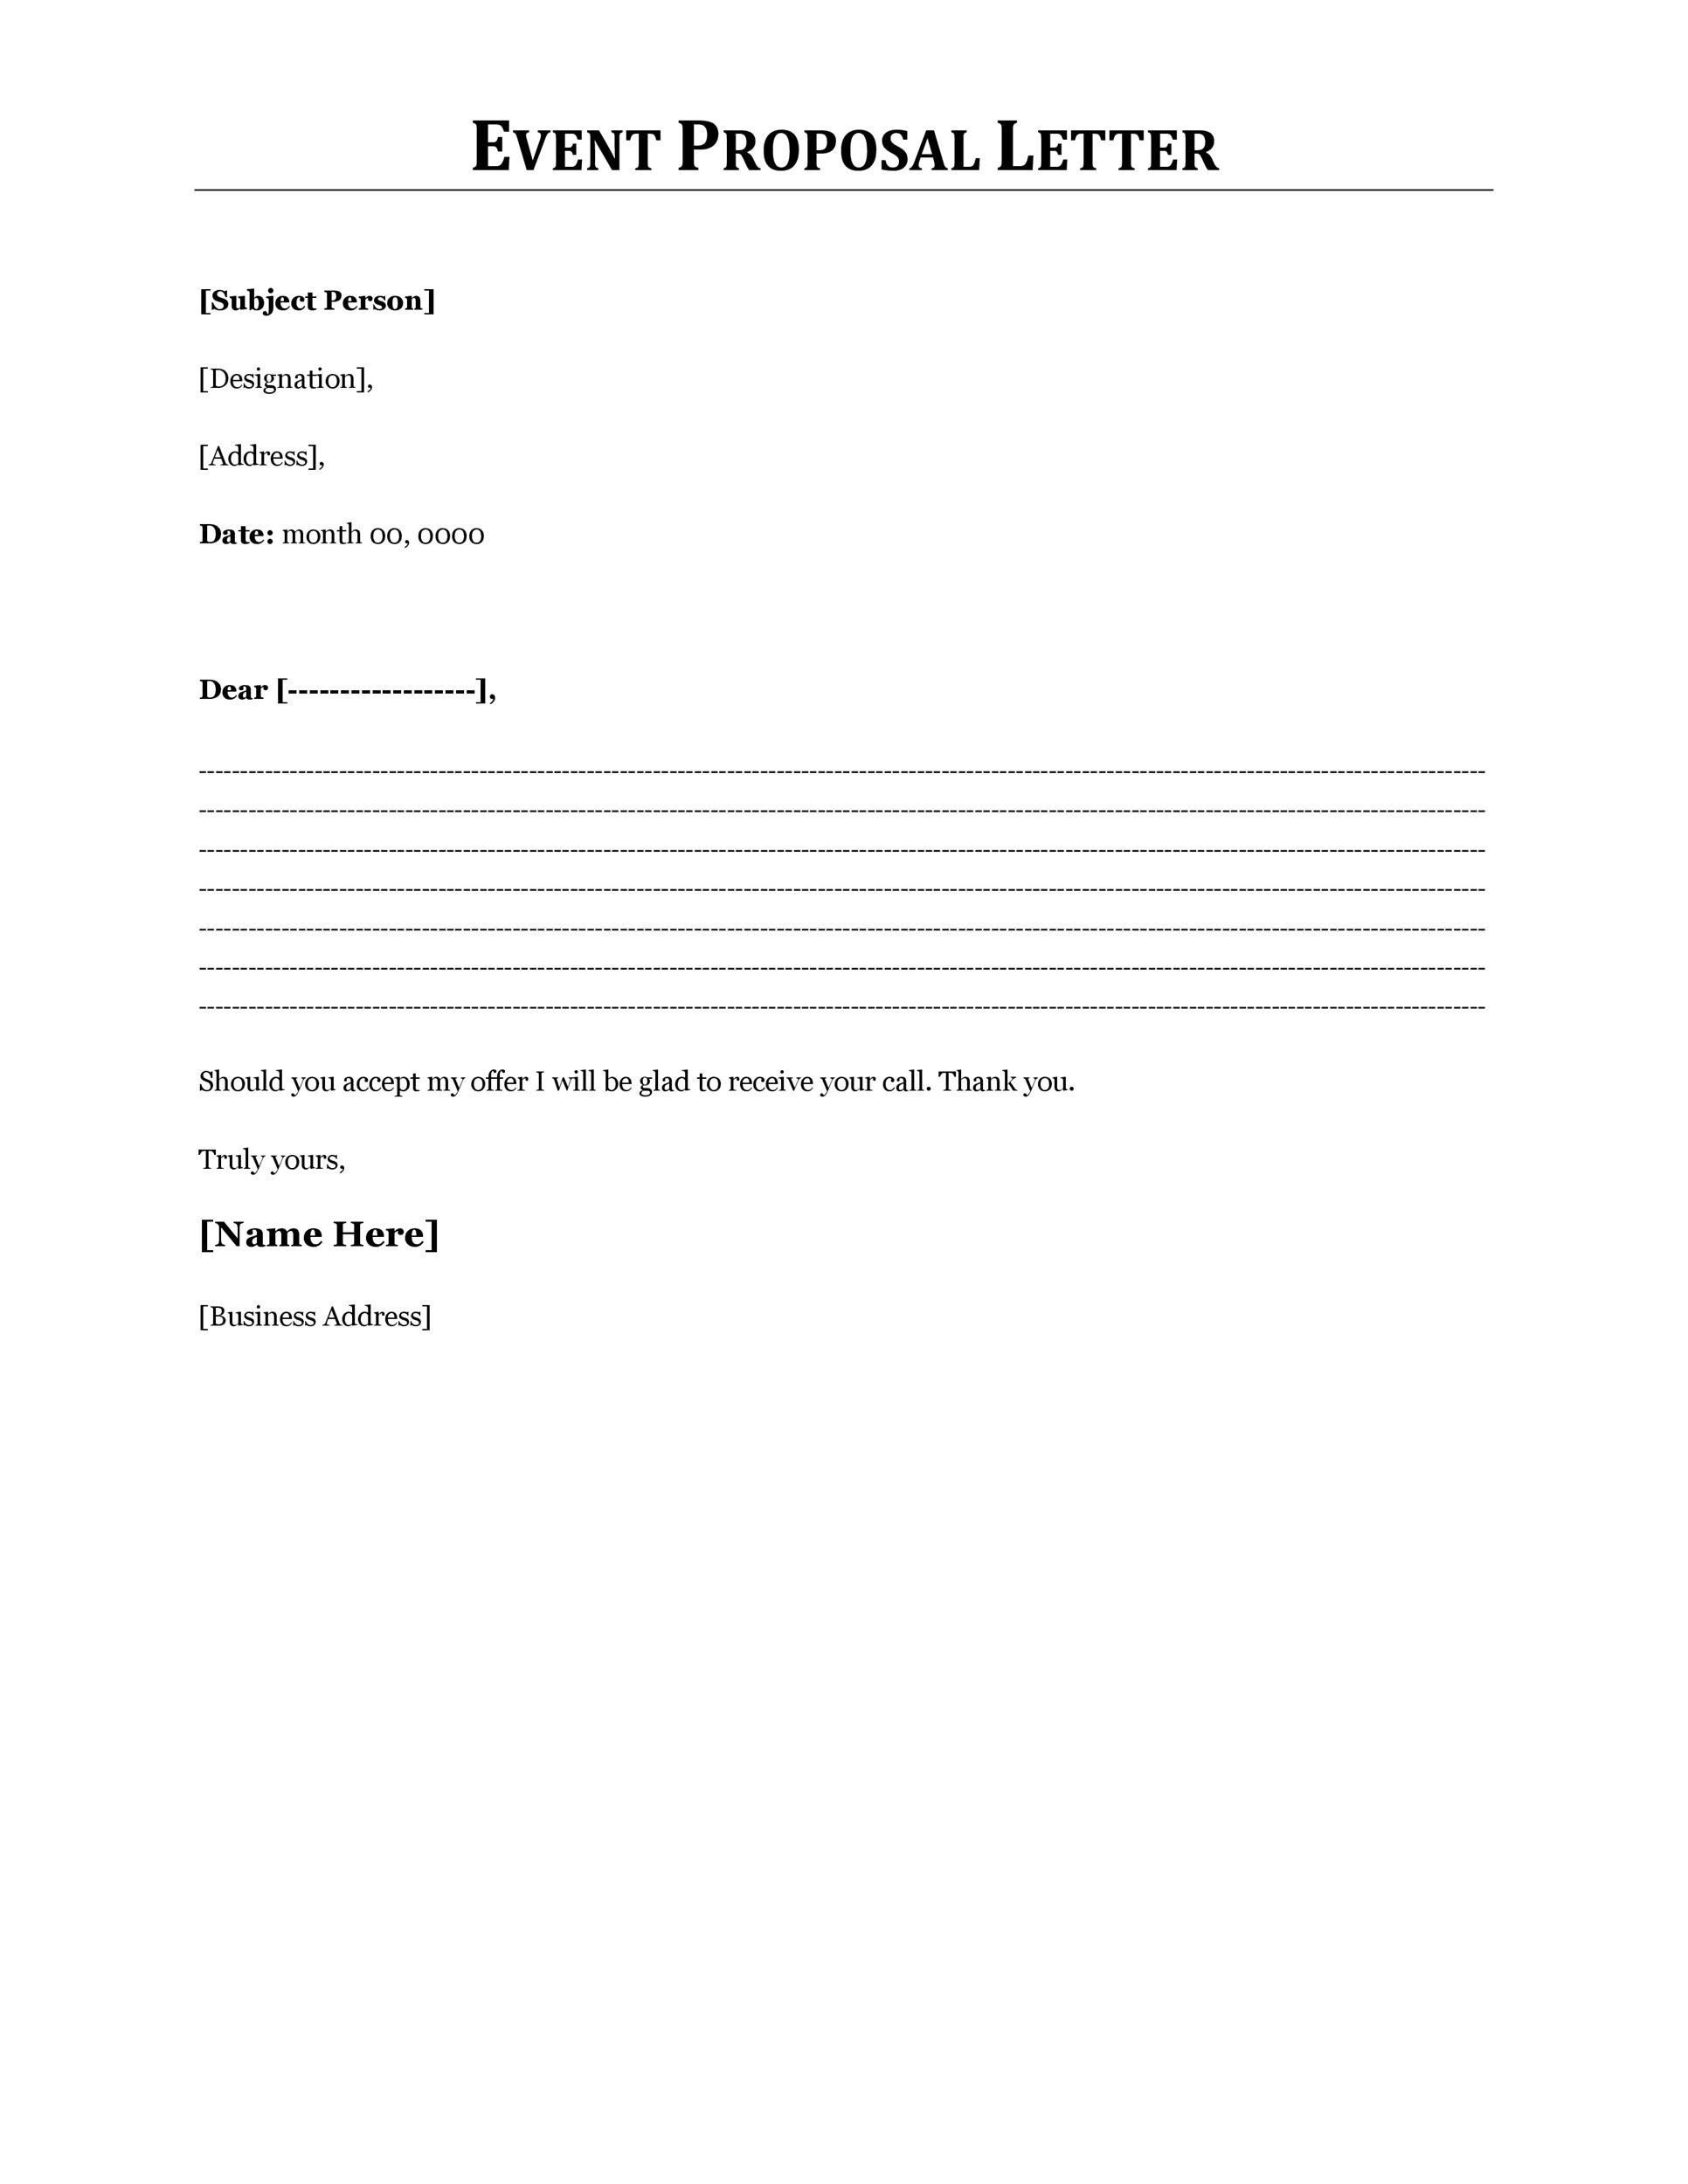 sample cover letter for event proposal